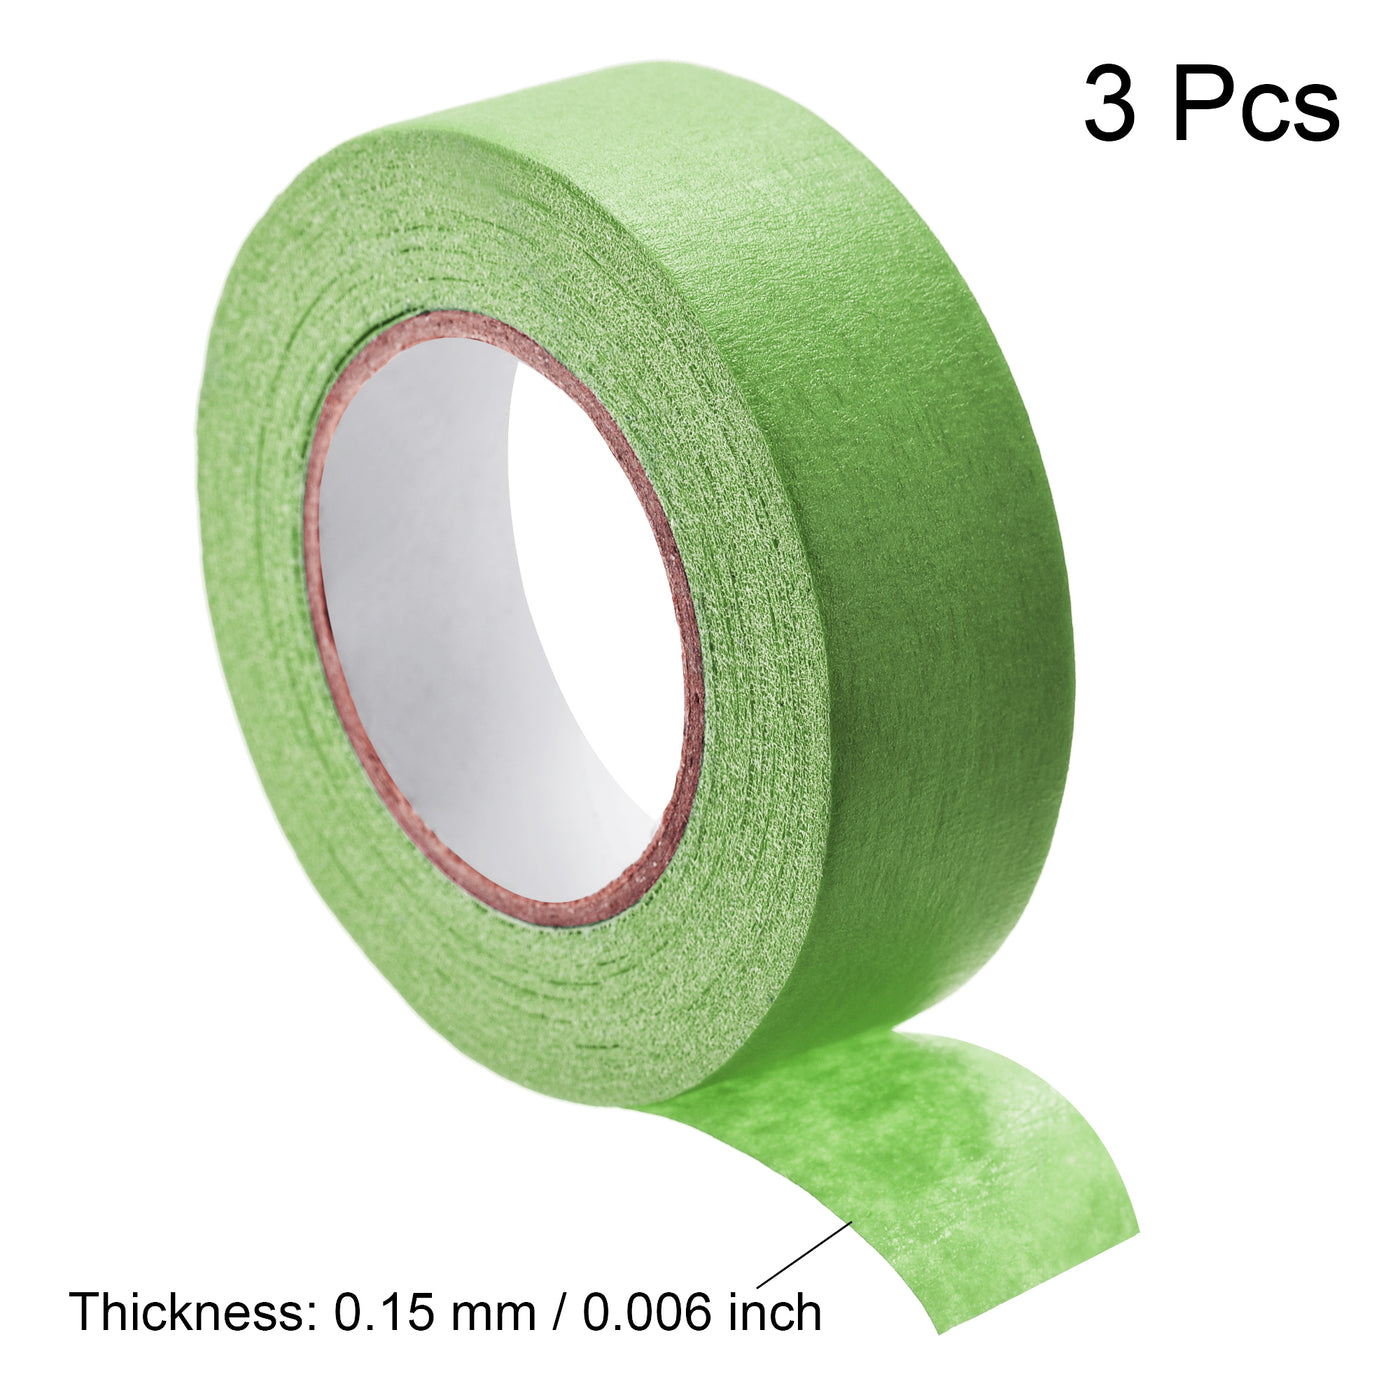 uxcell Uxcell 3Pcs 20mm 0.8 inch Wide 20m 21 Yards Masking Tape Painter Tape Rolls Light Green